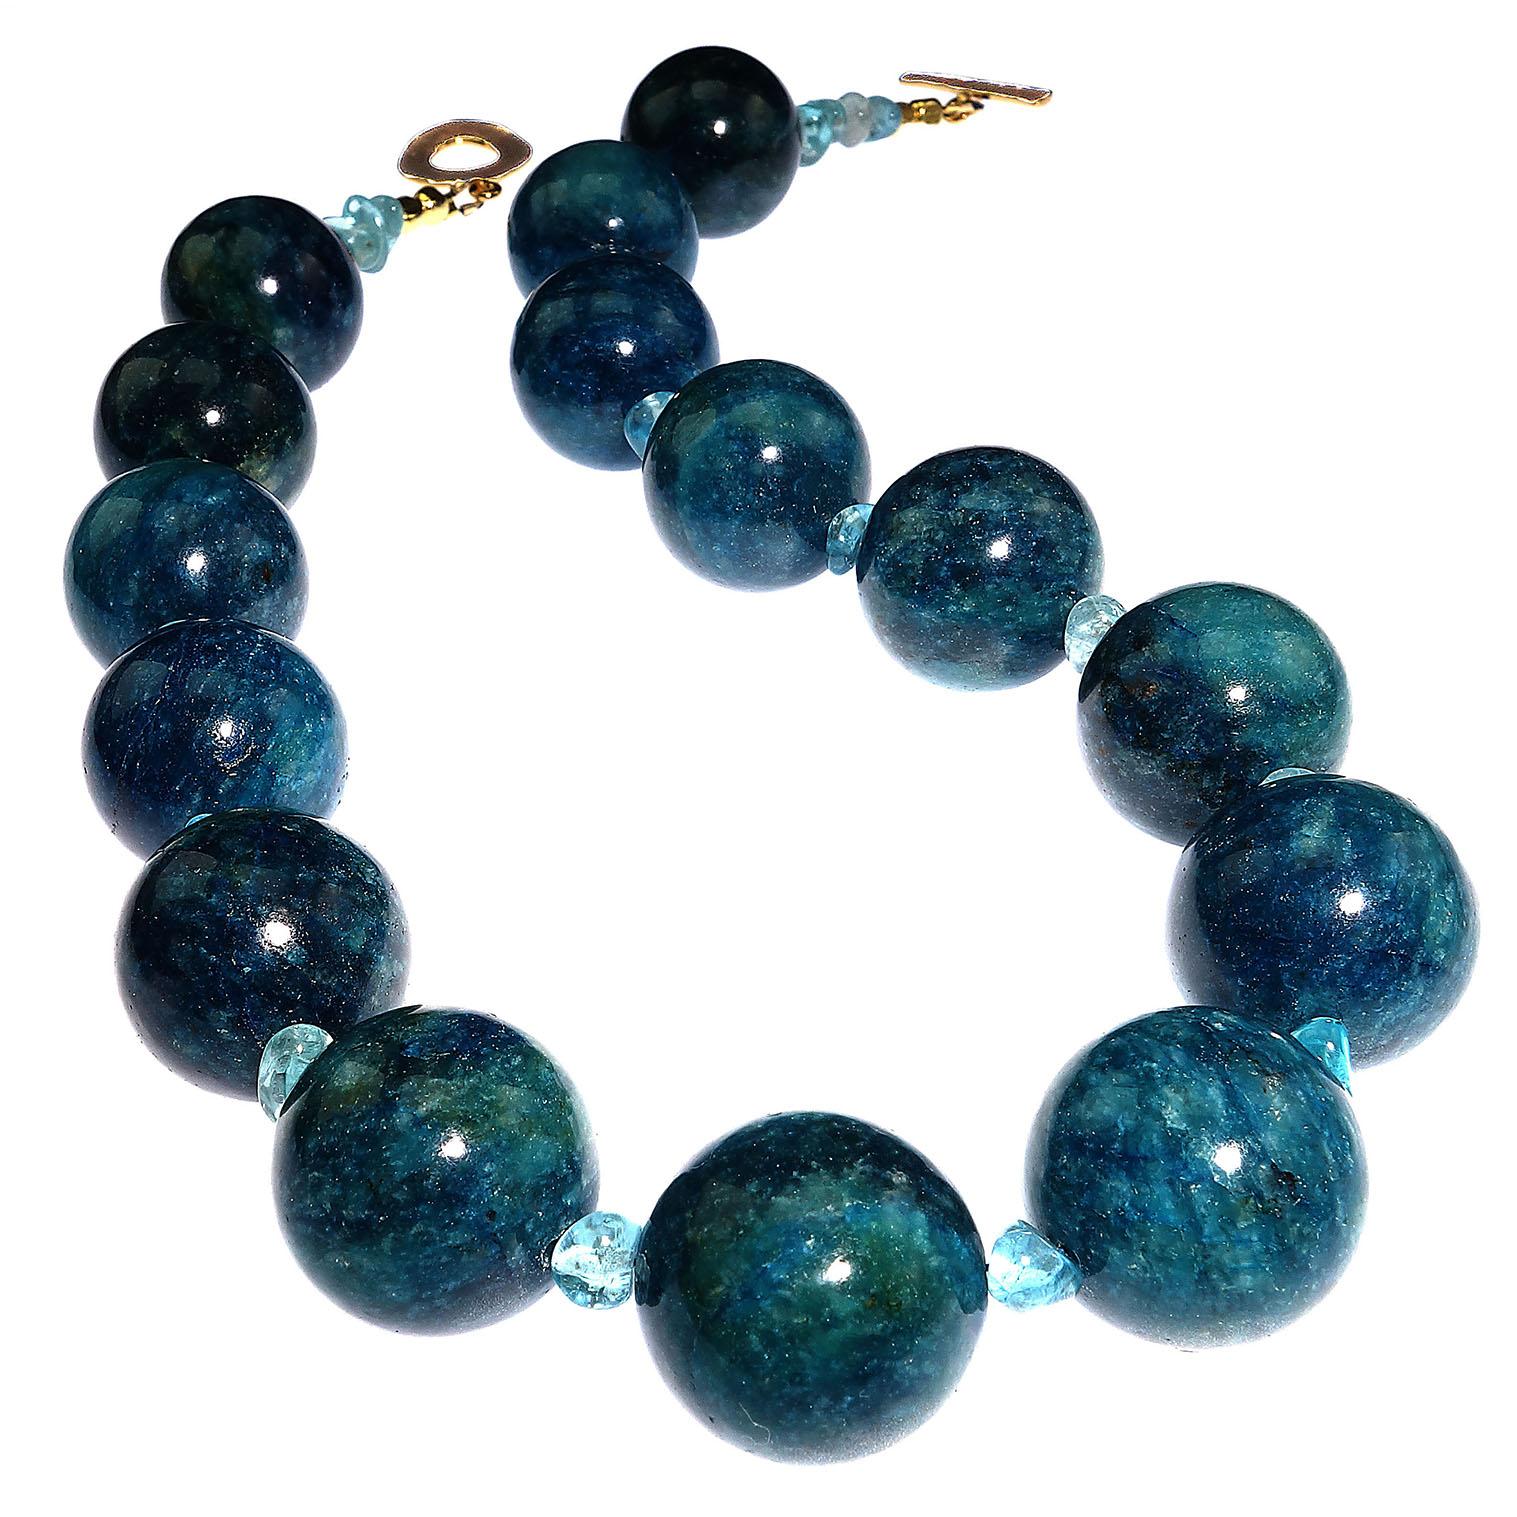 Handmade statement necklace of  highly polished, 20MM Teal color Apatite spheres.  This Apatite is accented with smaller, transparent  highly polished glowing Apatite.  The contrast between the two shades  of Apatite enhances each. Apatite is often